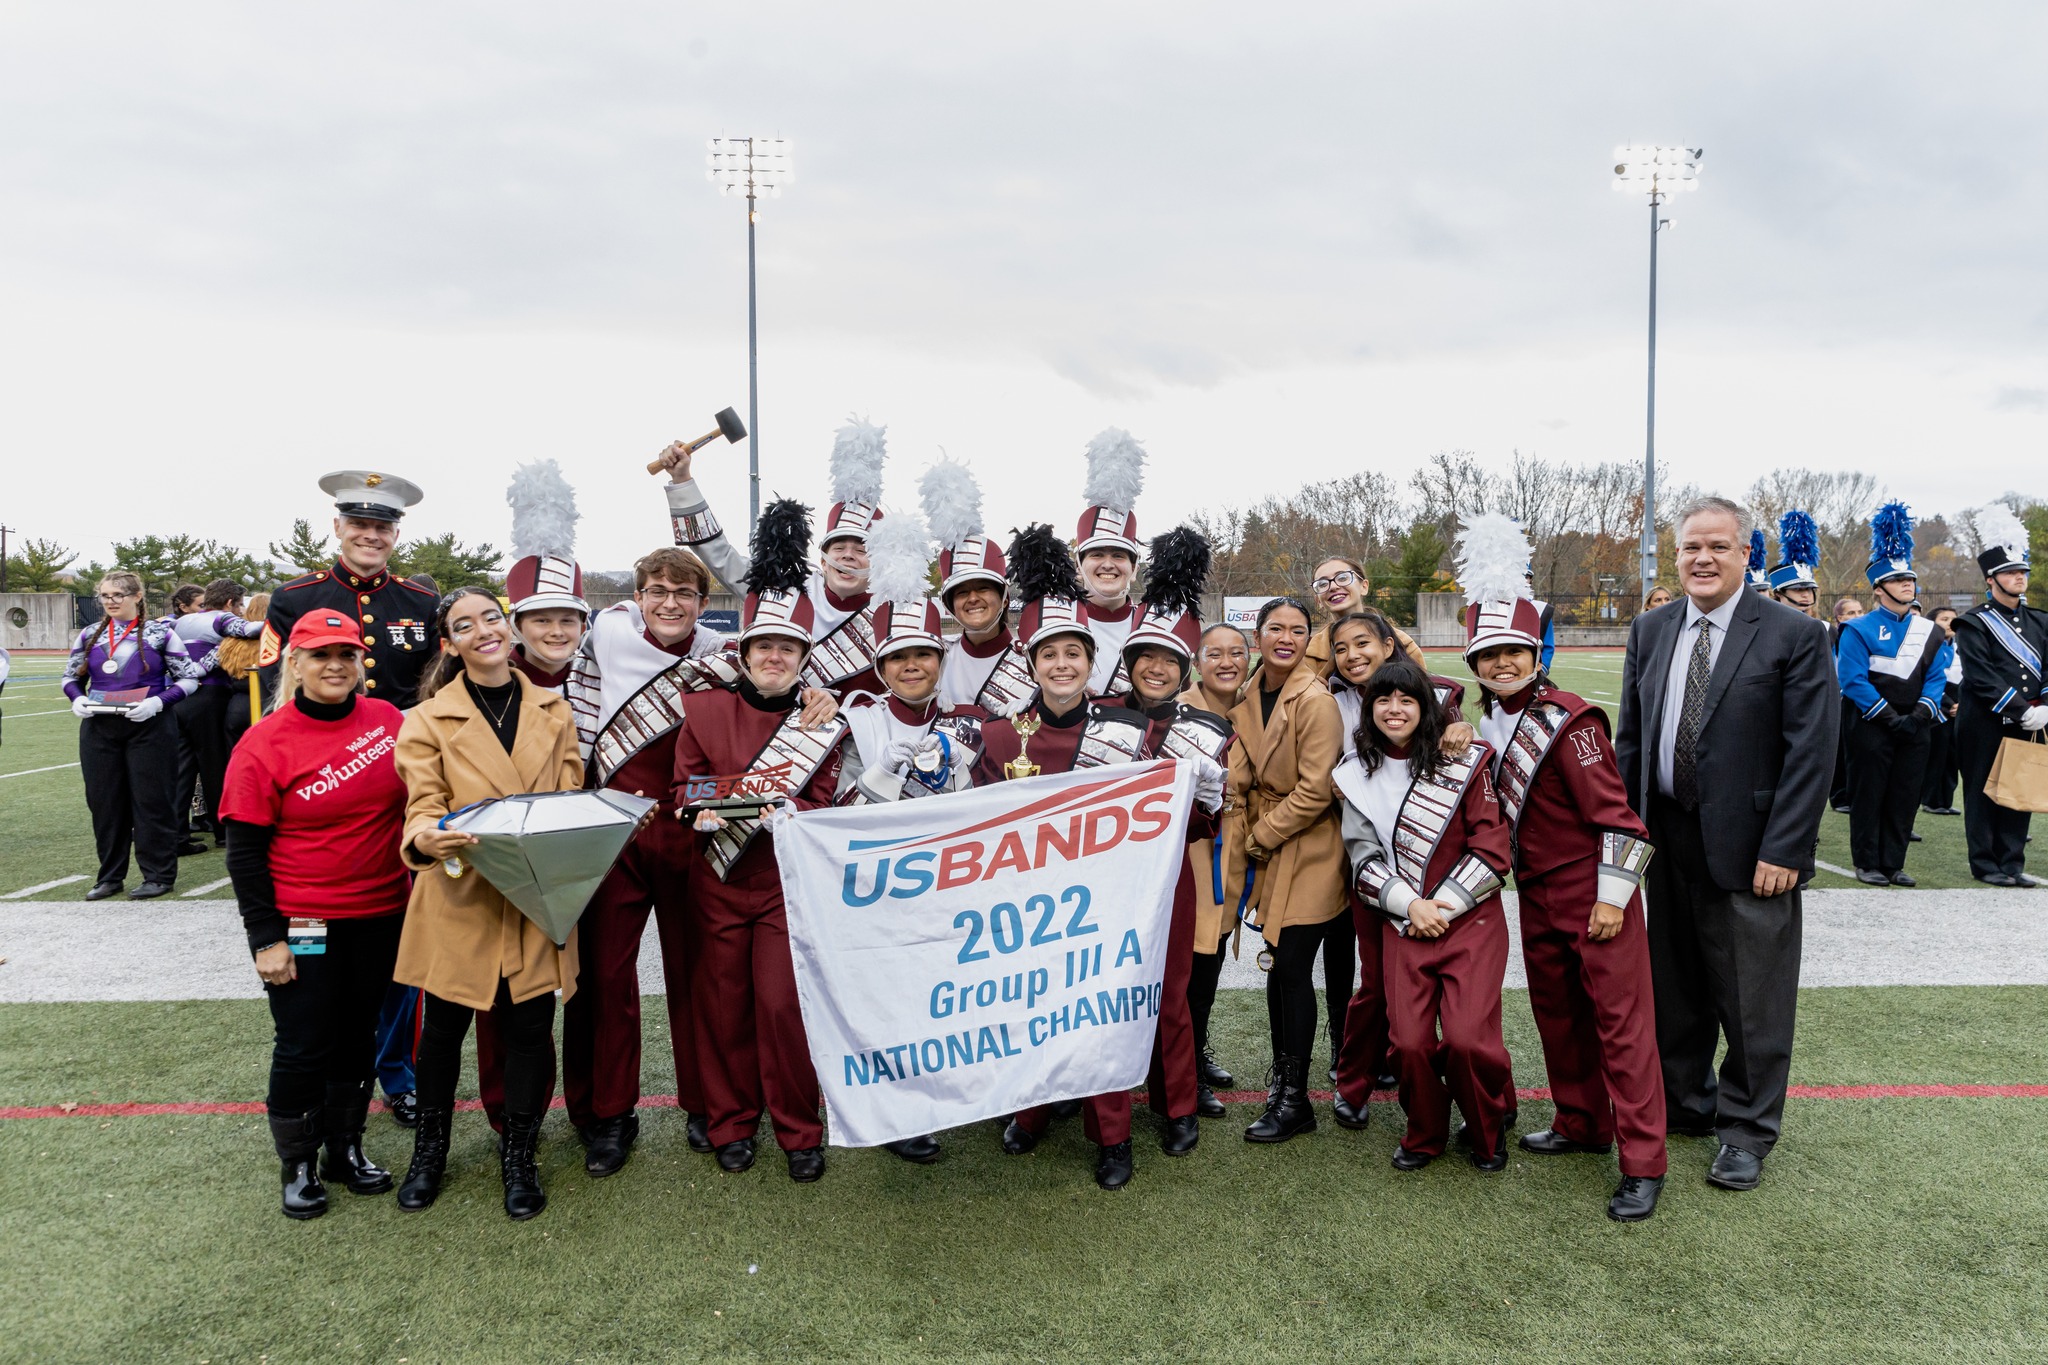 The NHS Marching Band smiling and holding a banner declaring them the USBands Group IIIA National Champions